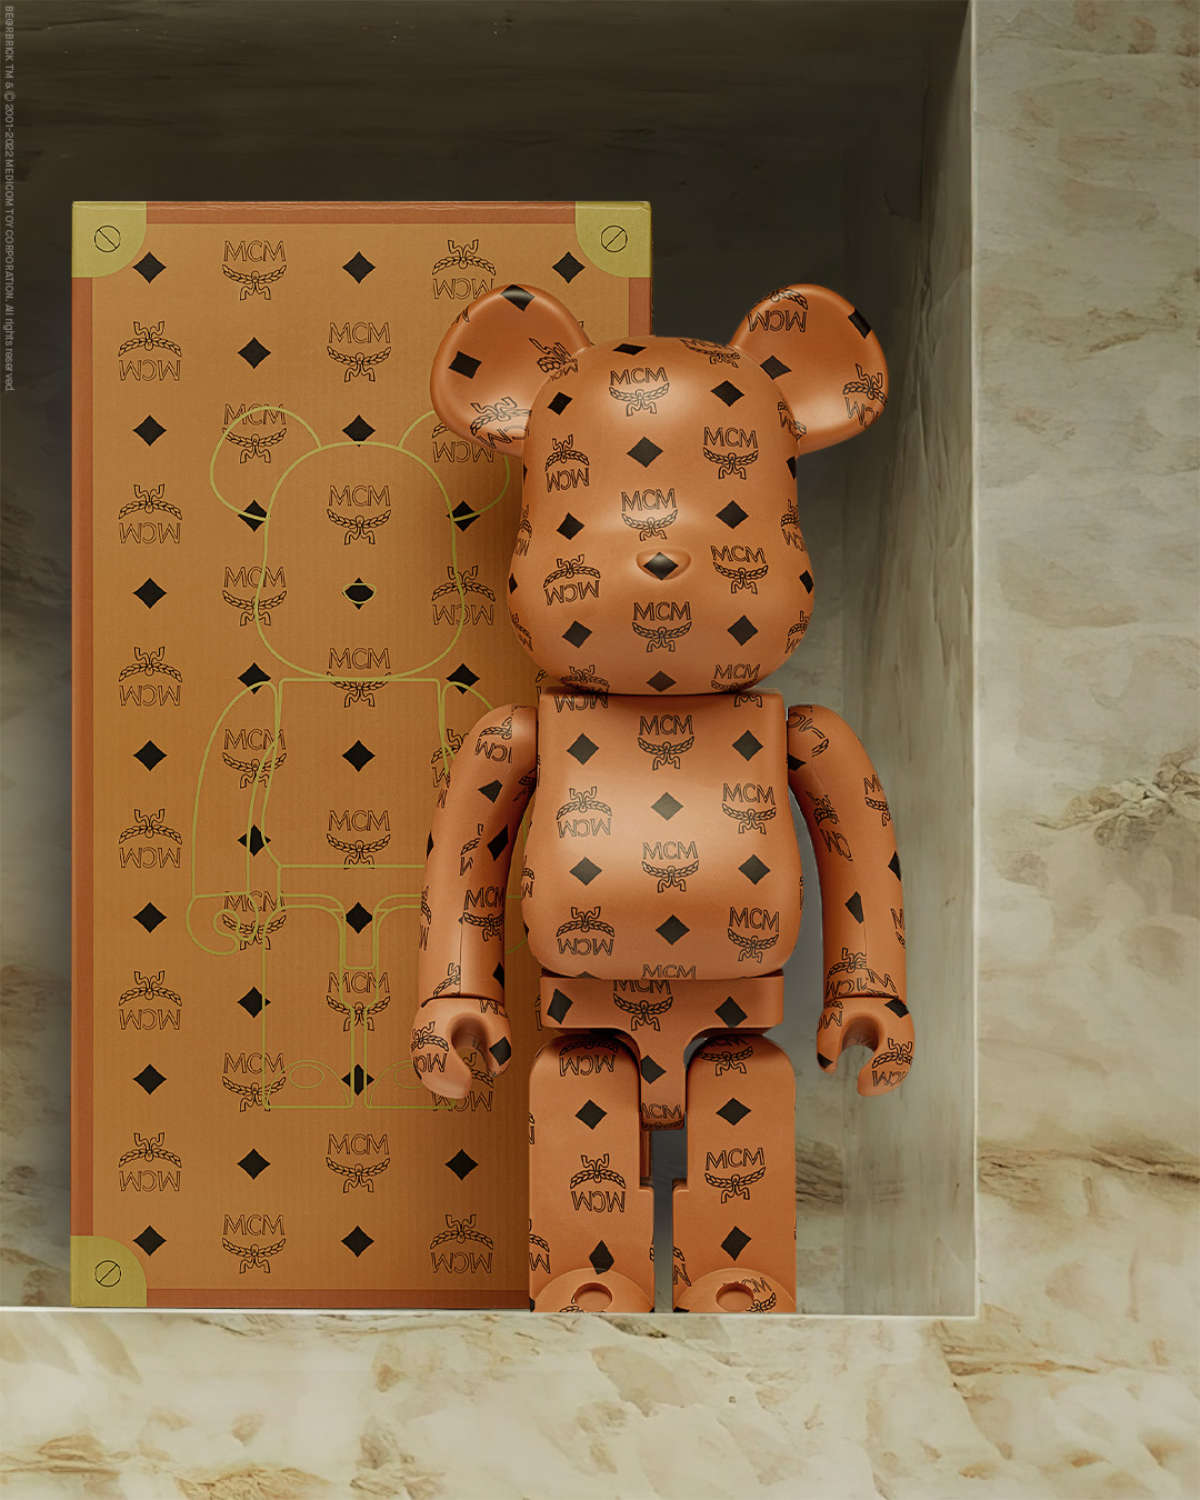 MCM X BE@RBRICK – The Next Collaboration